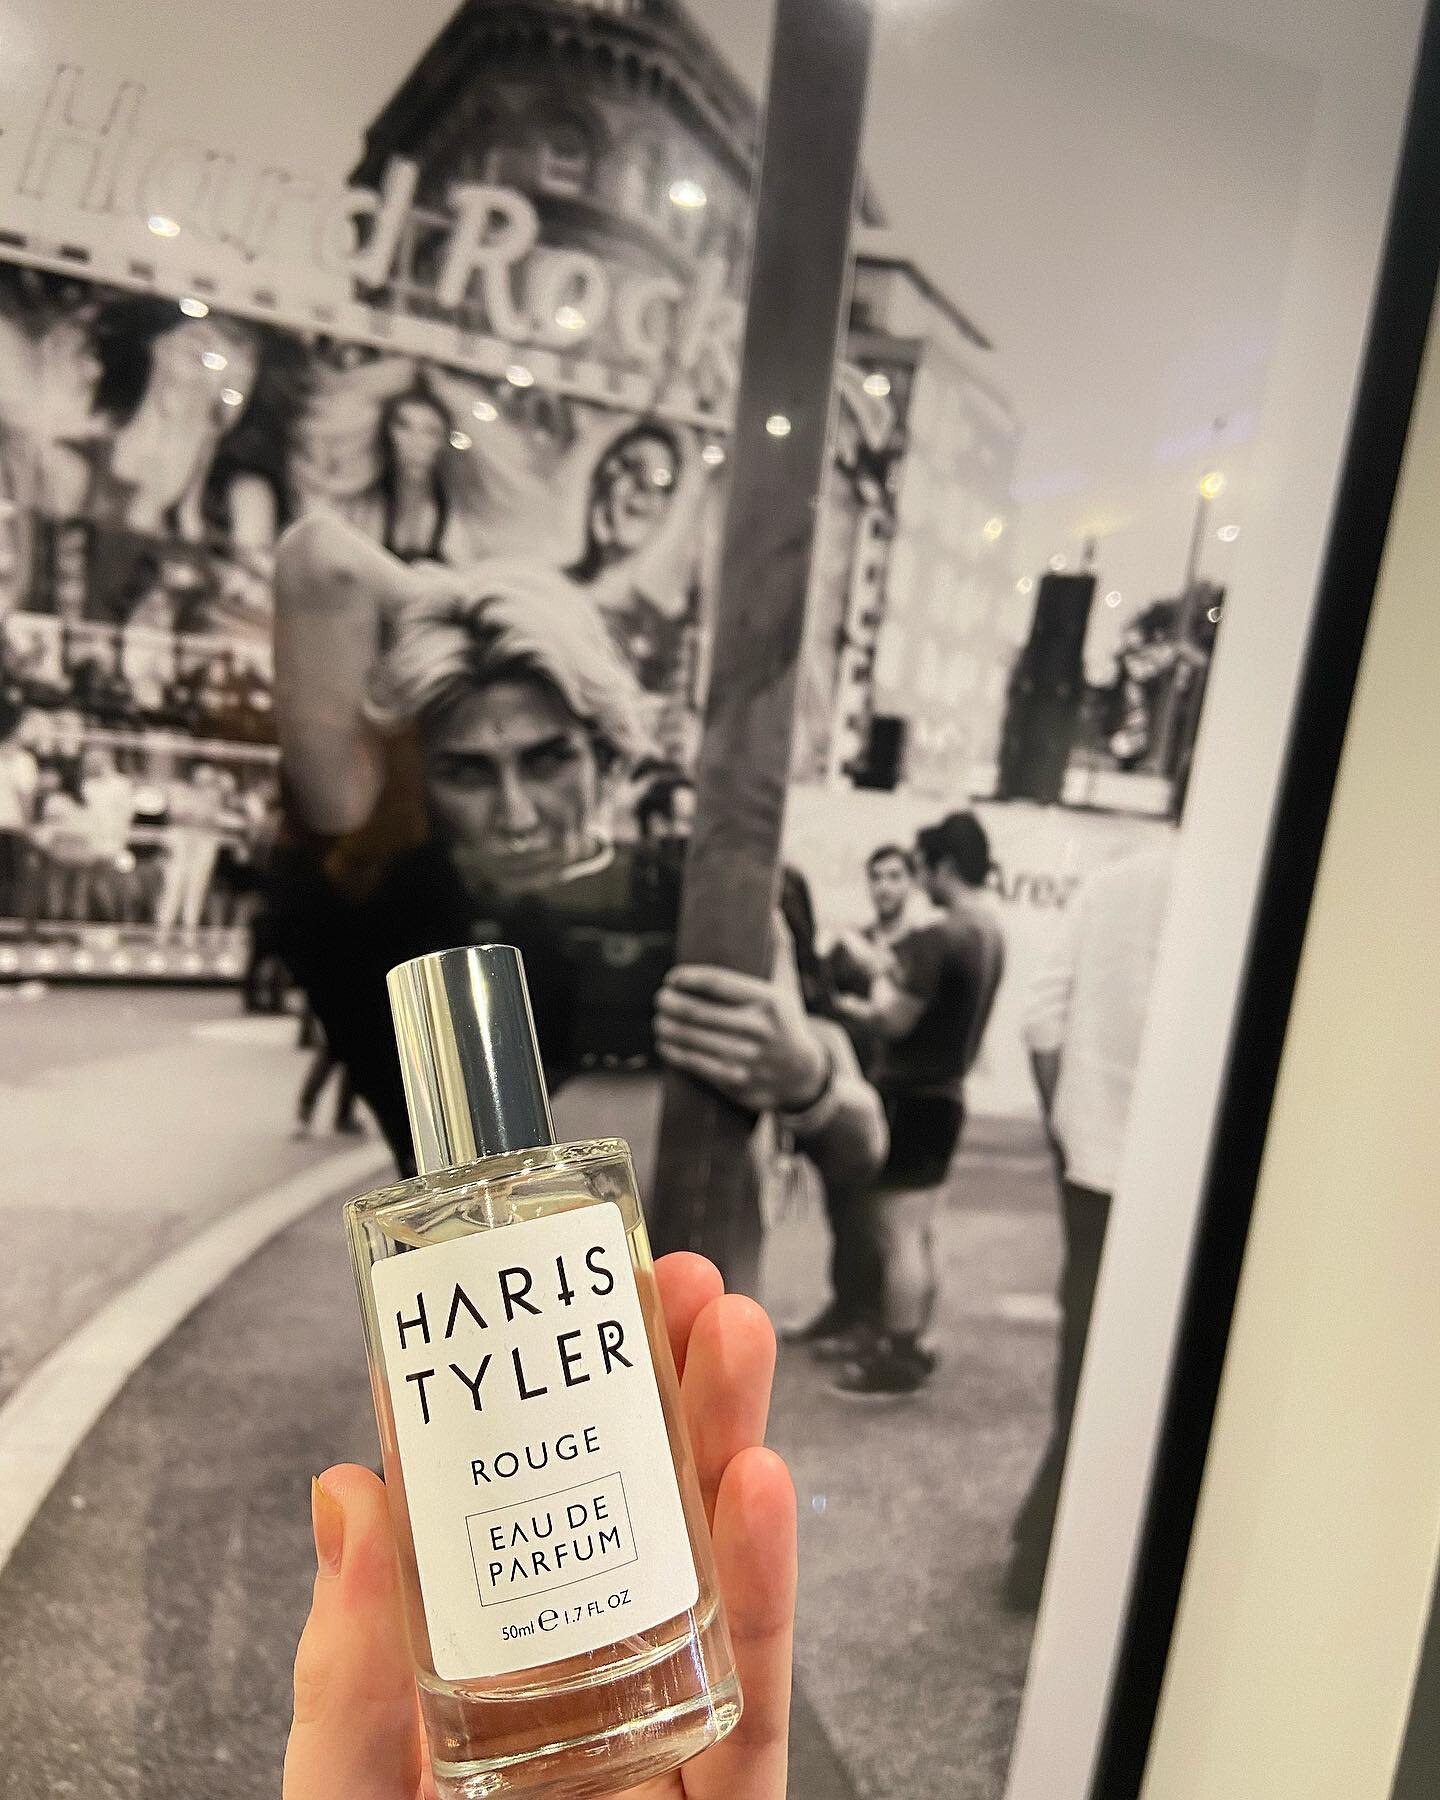 HARIS TYLER PERFUME IS BACK!!!😍

Limited stock availability so grab yours in store today!!! NOW &pound;45!!!

Have a great weekend everyone!!🤩
#perfume #hairsalon #supersalon #hairgods #halifax #westgatearcadehalifax